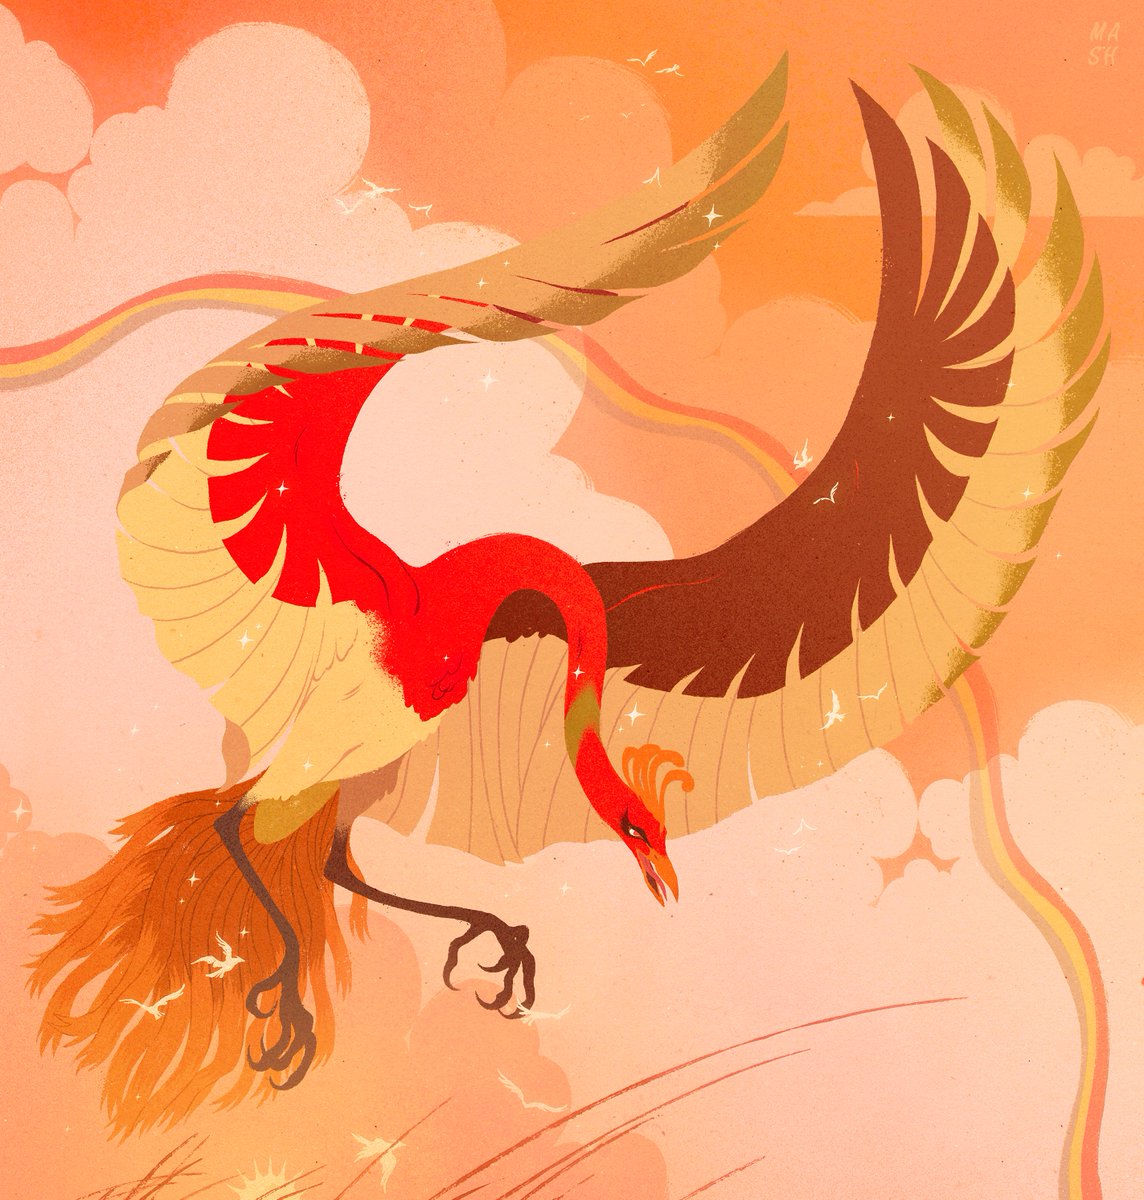 「Oh! You encountered a wild Ho-Oh! 」|Samantha Mash🌿のイラスト